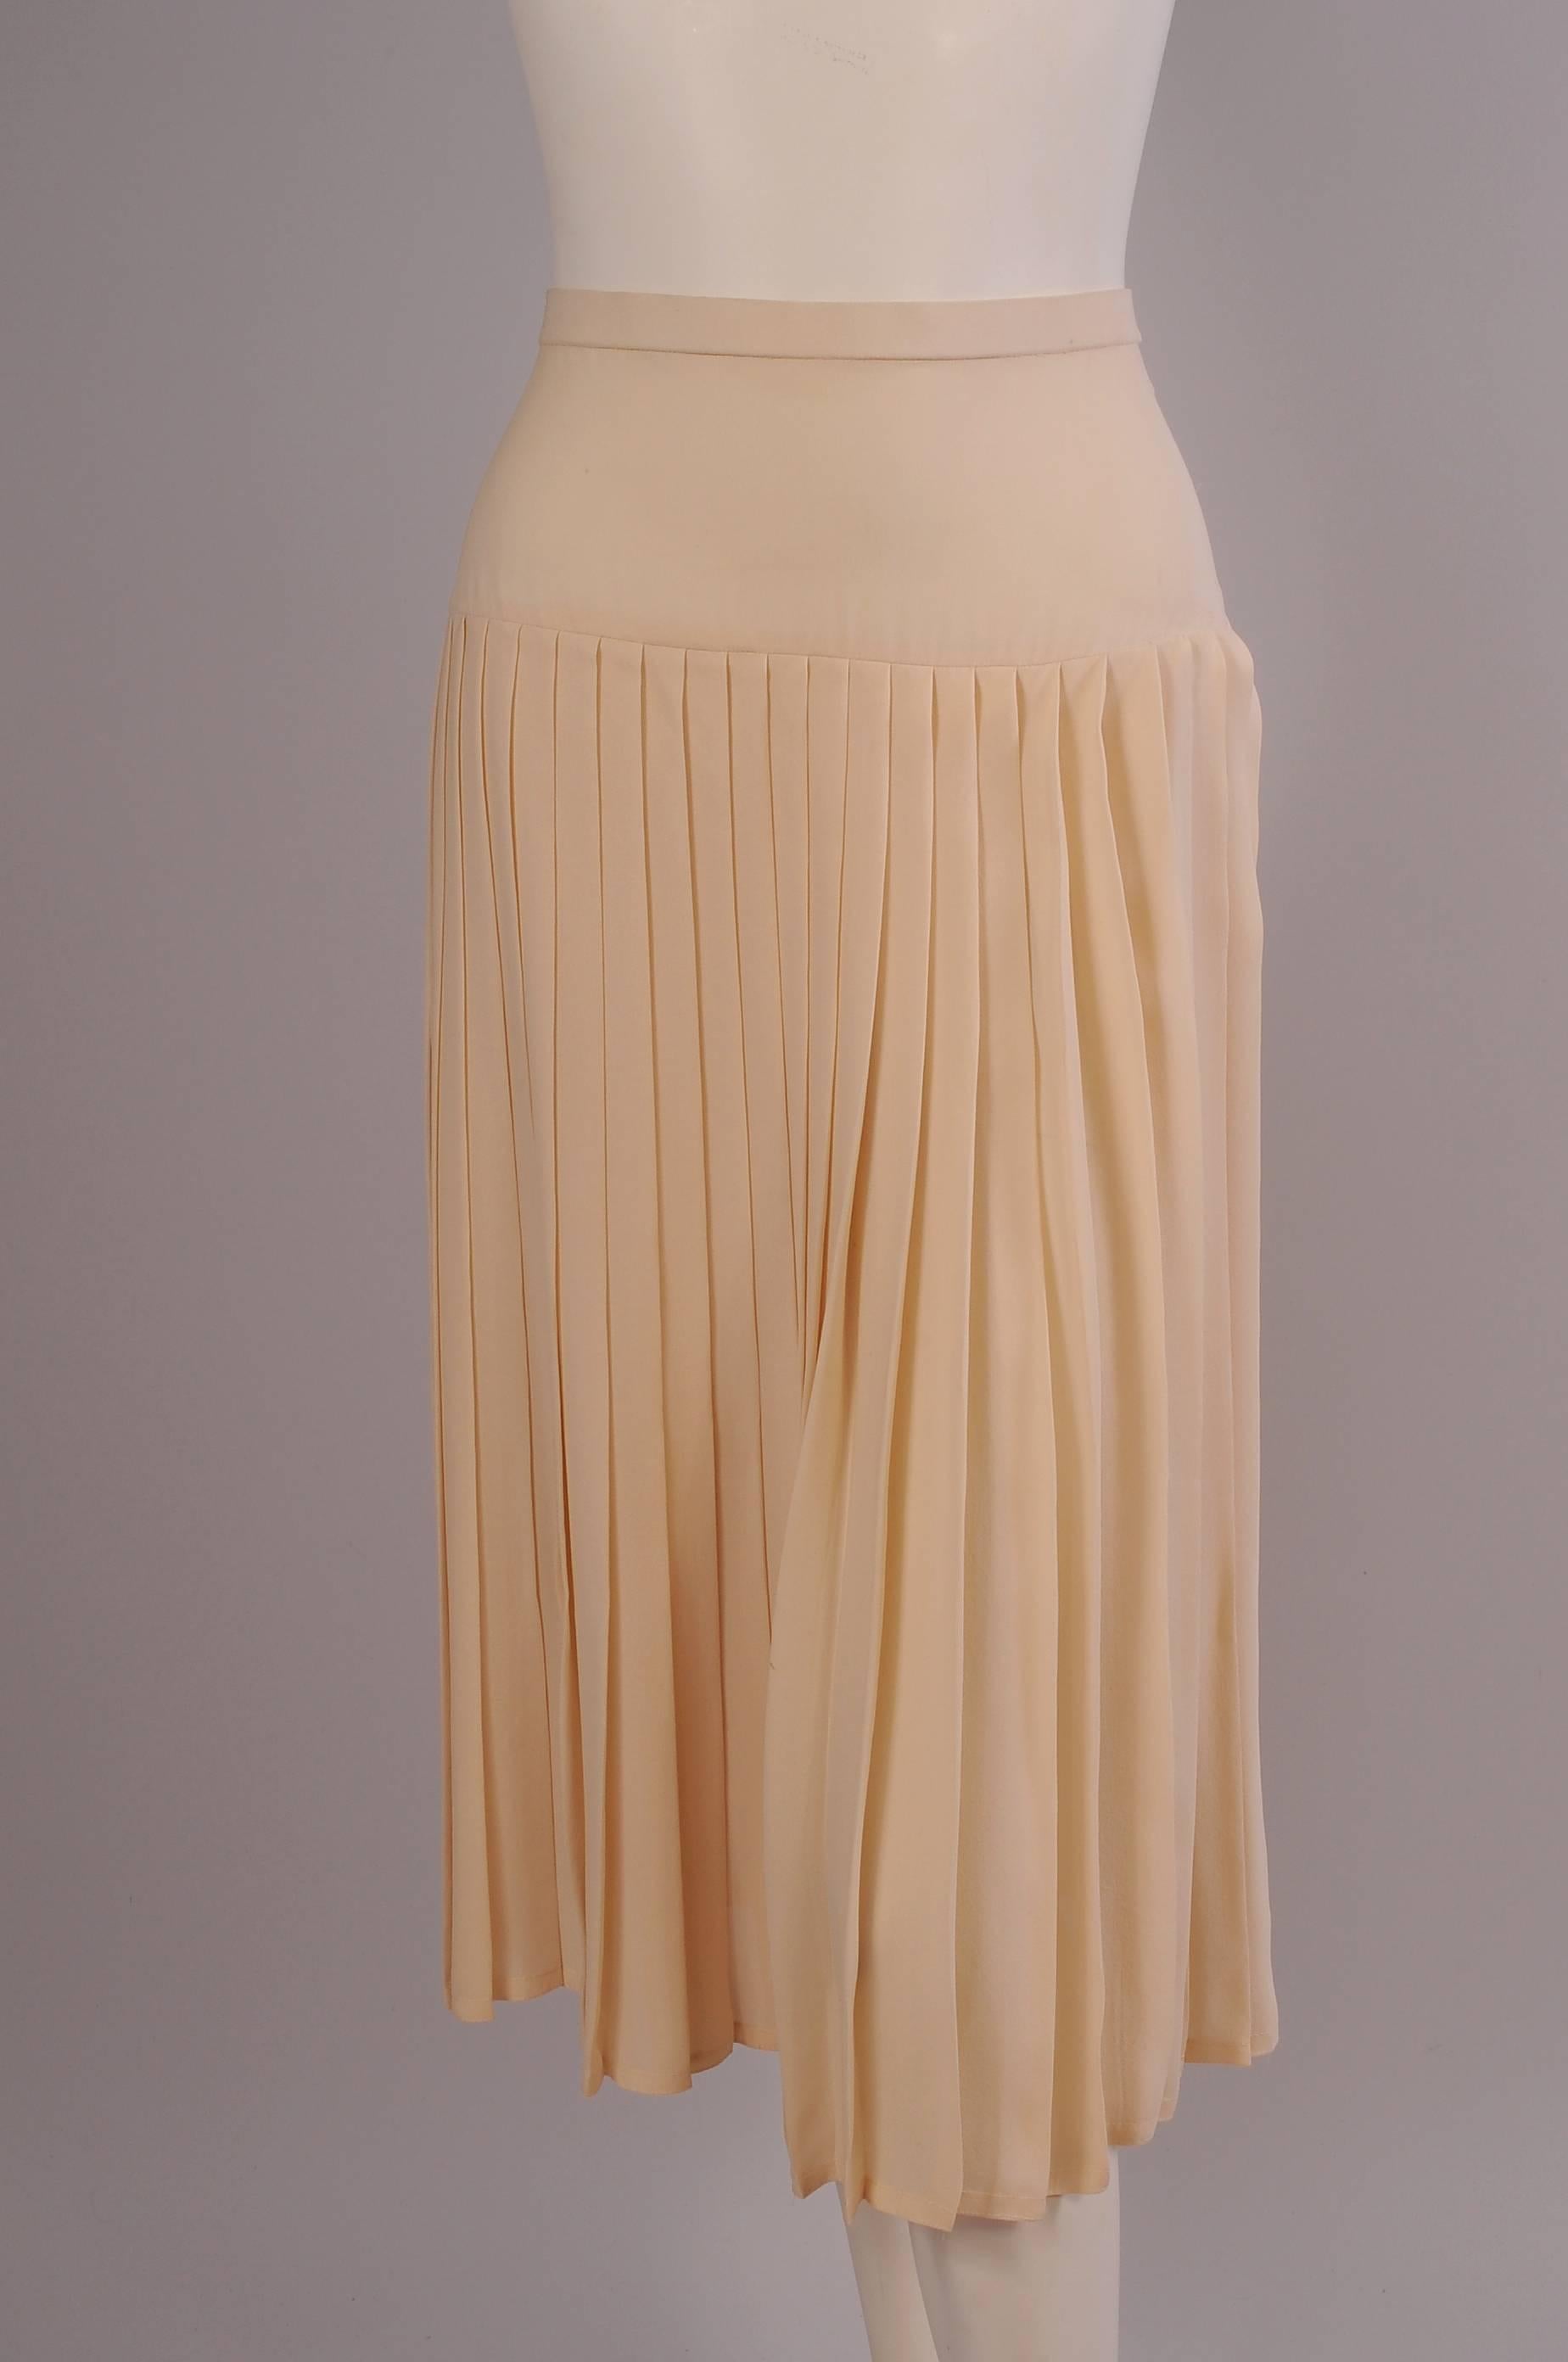 Chloe Creamy Vanilla Silk Two Piece Dress In Excellent Condition In New Hope, PA